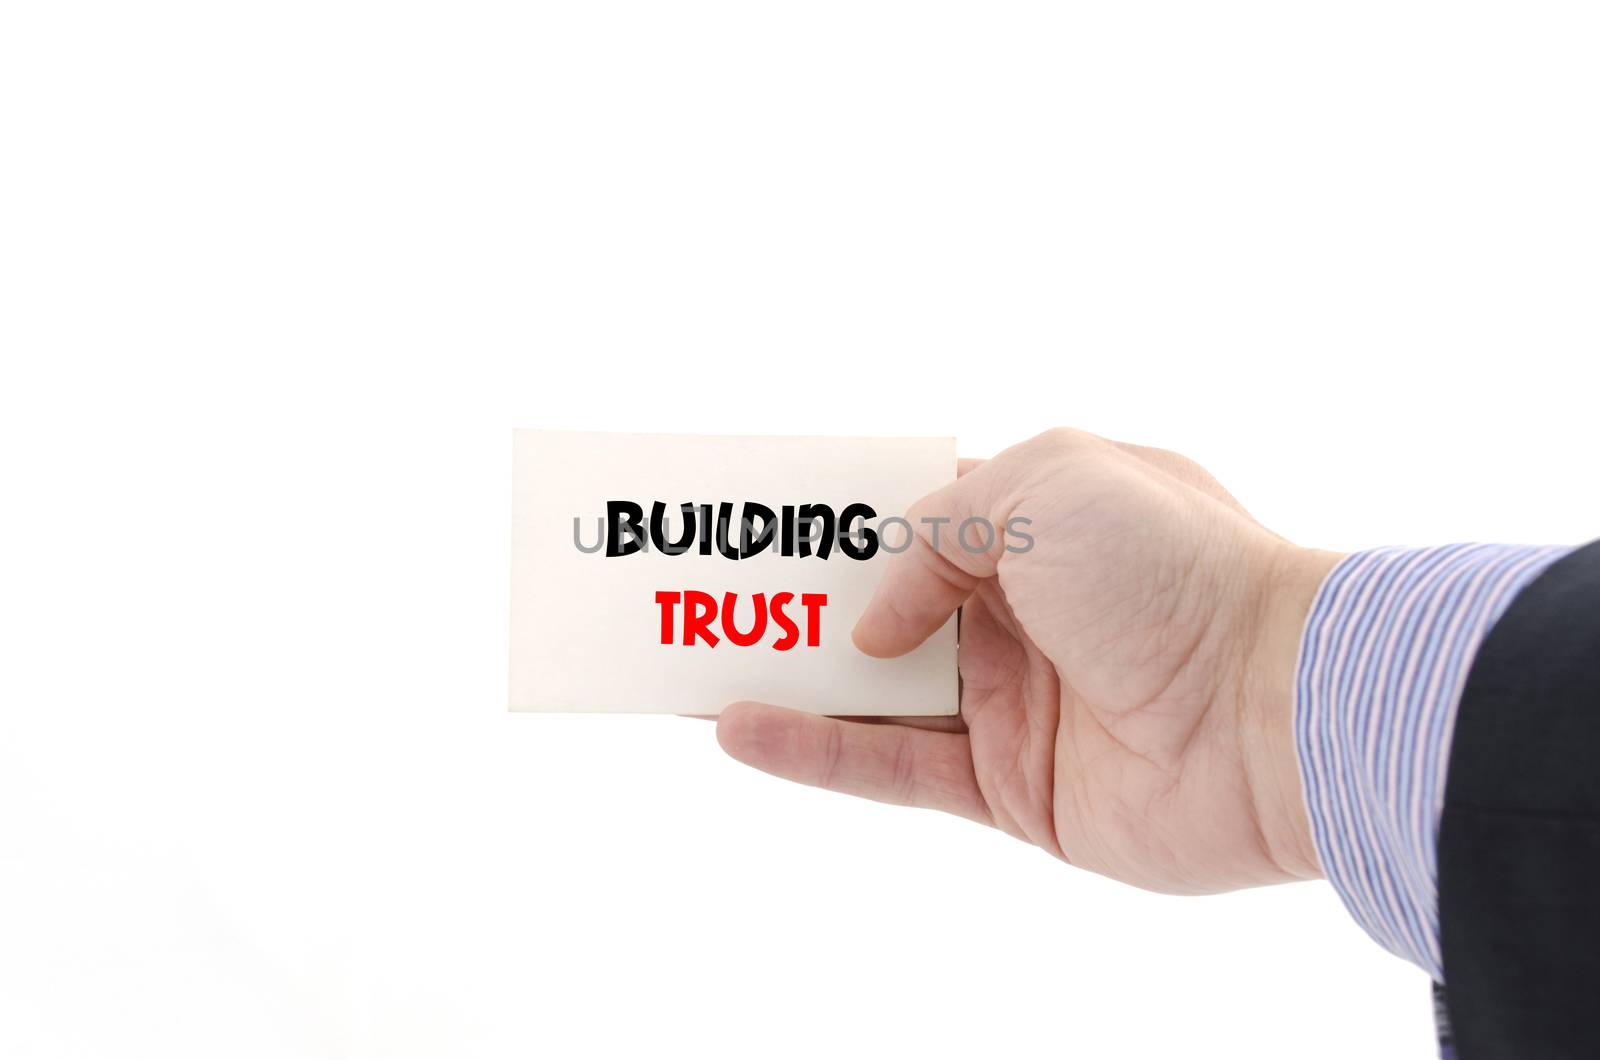 Building trust text concept isolated over white background